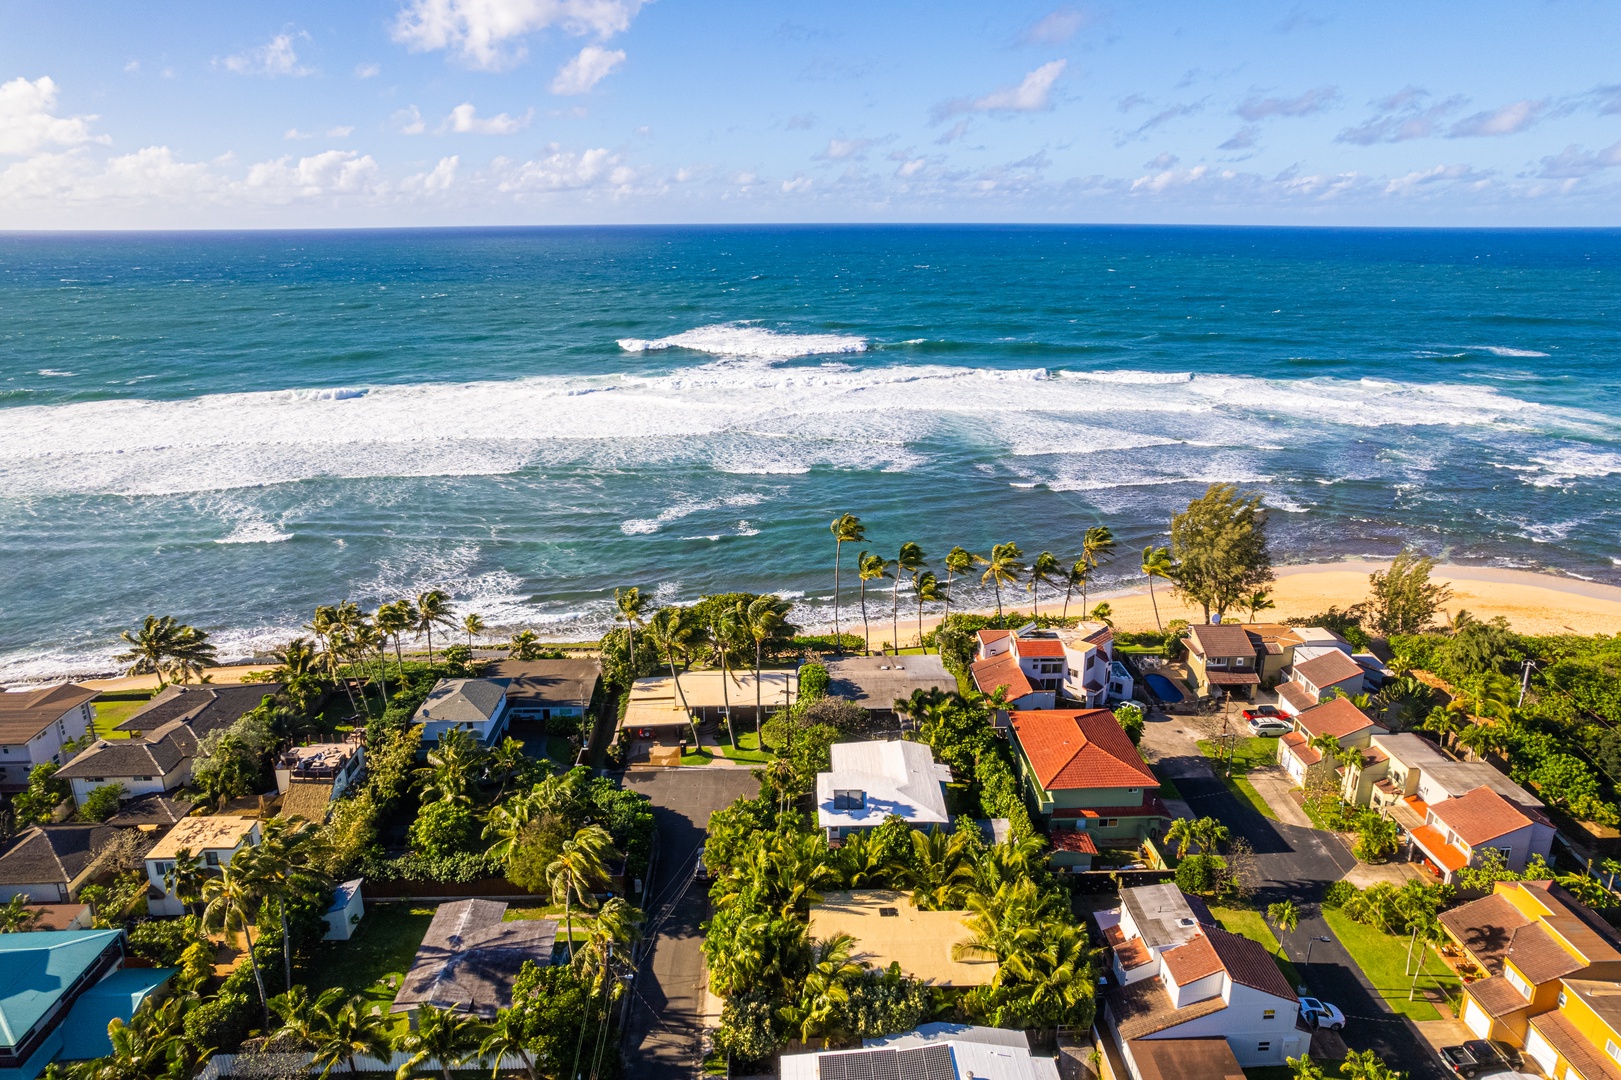 Haleiwa Vacation Rentals, Sunset Point Hawaiian Beachfront** - A perfect spot for surfers!